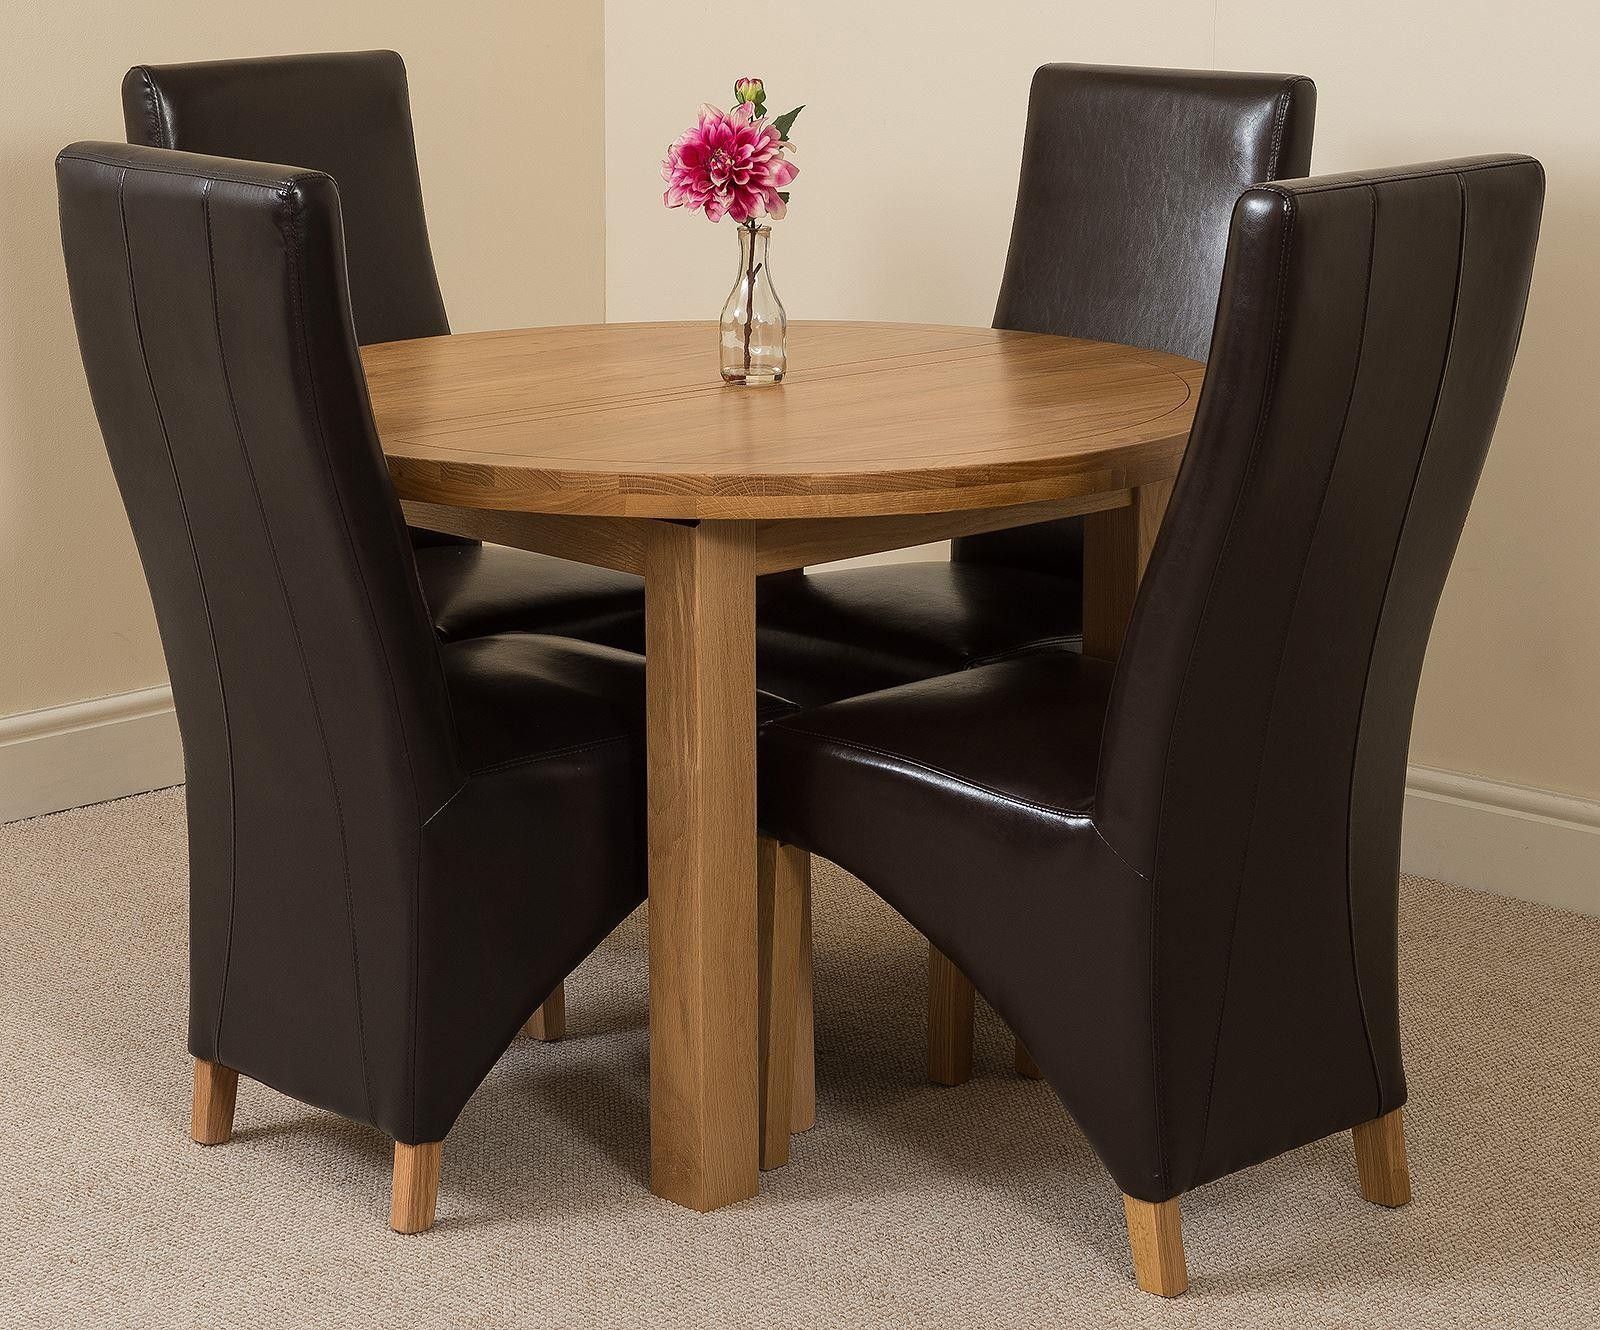 Edmonton Solid Oak Extending Oval Dining Table With 4 Lola Dining For Extendable Oval Patio Dining Sets (View 13 of 15)